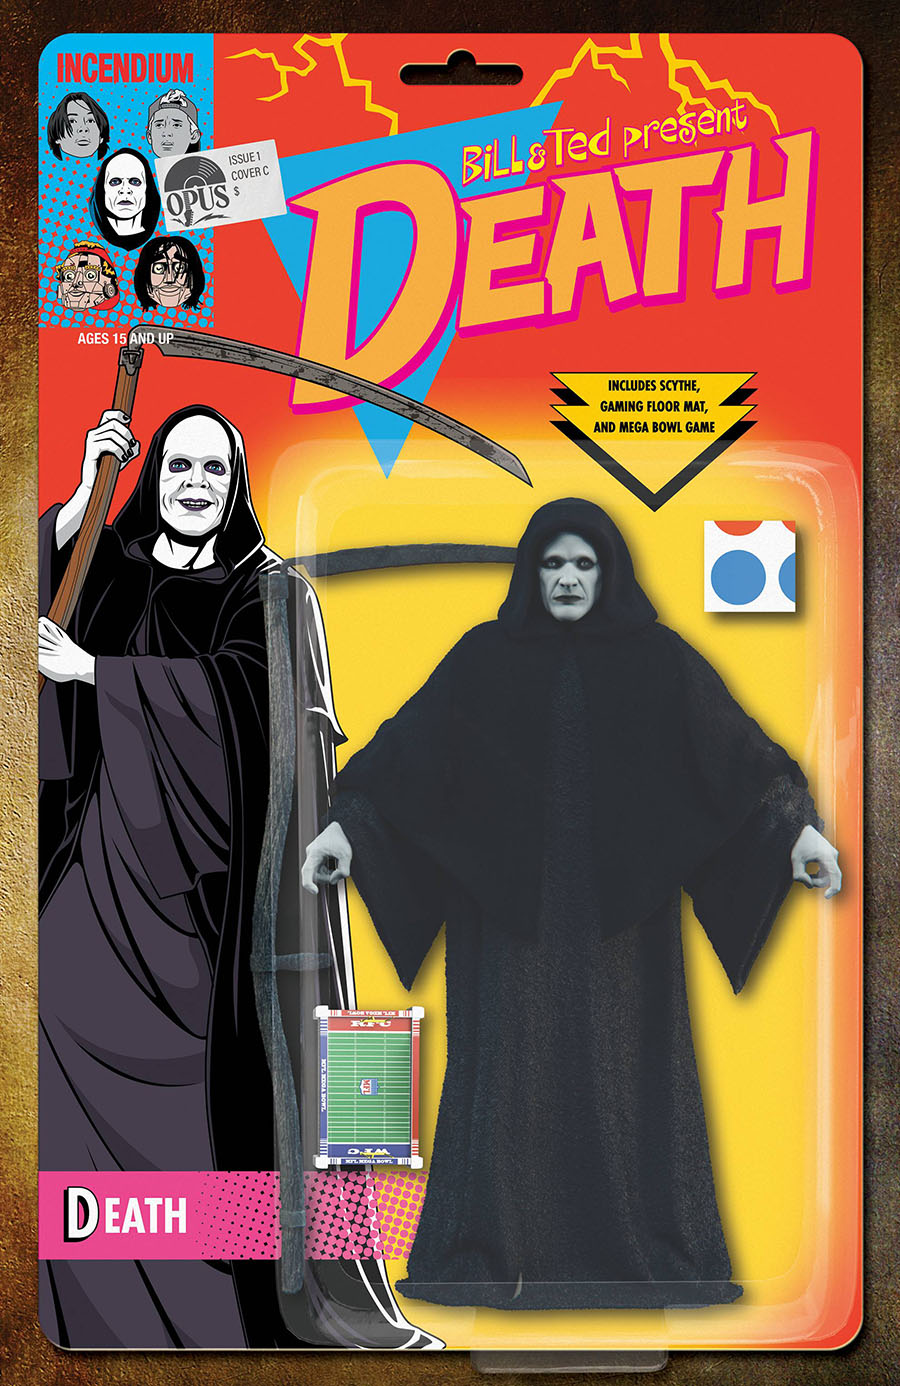 Bill & Ted Present Death #1 (One Shot) Cover C Incentive Matthew Skiff & Pio Paulo Santana Death Action Figure Variant Cover